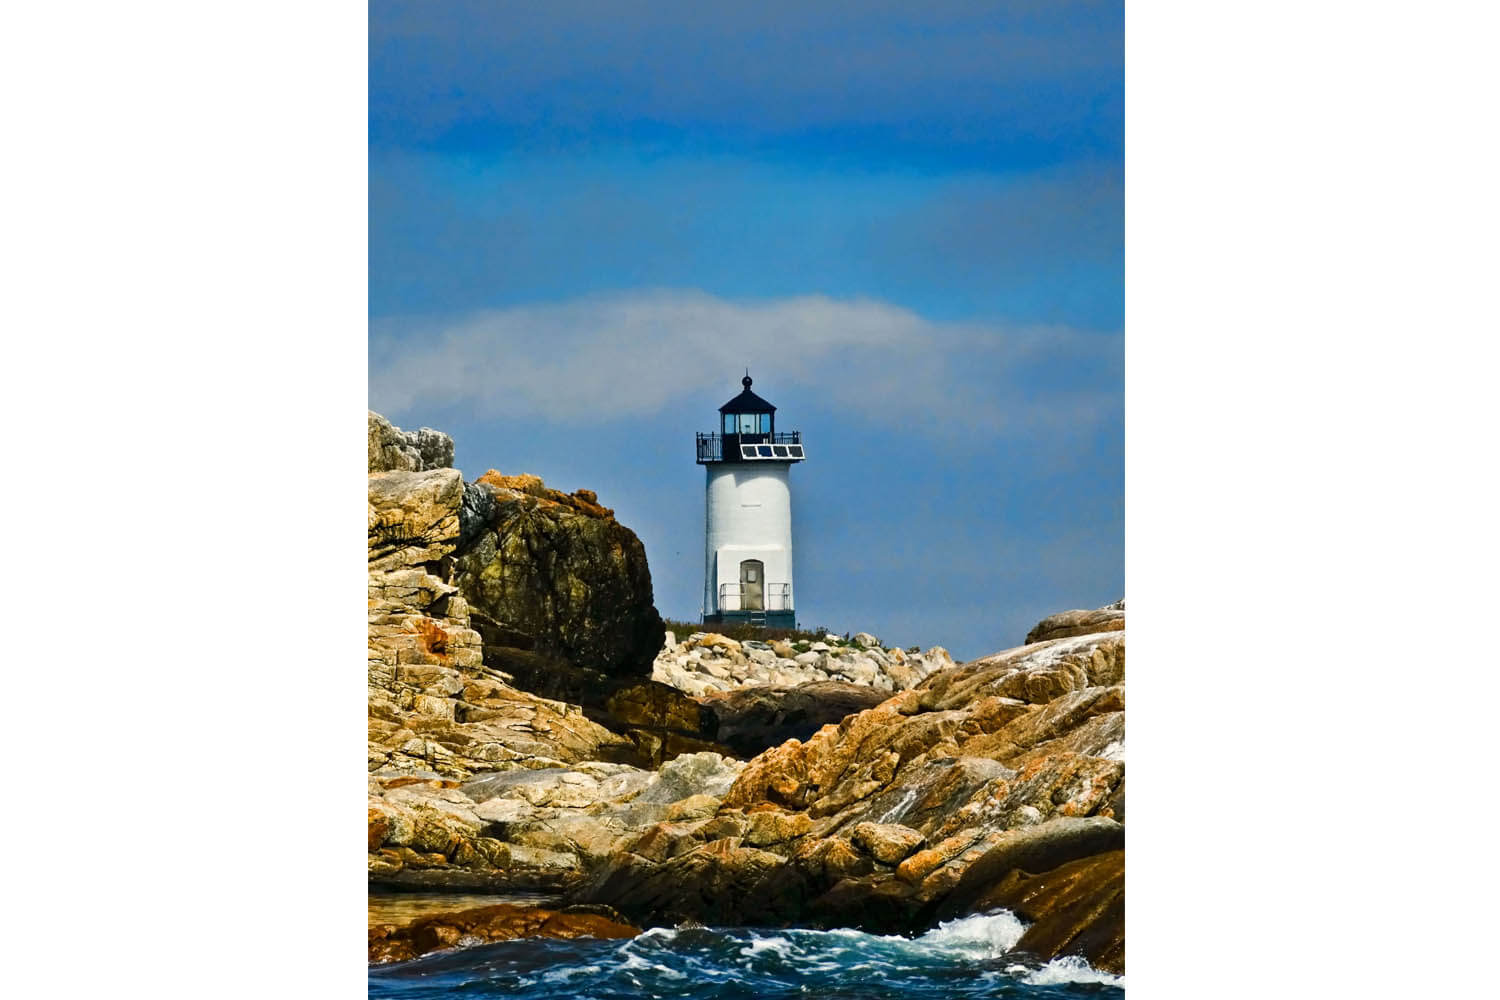 A lighthouse on the rocks near water